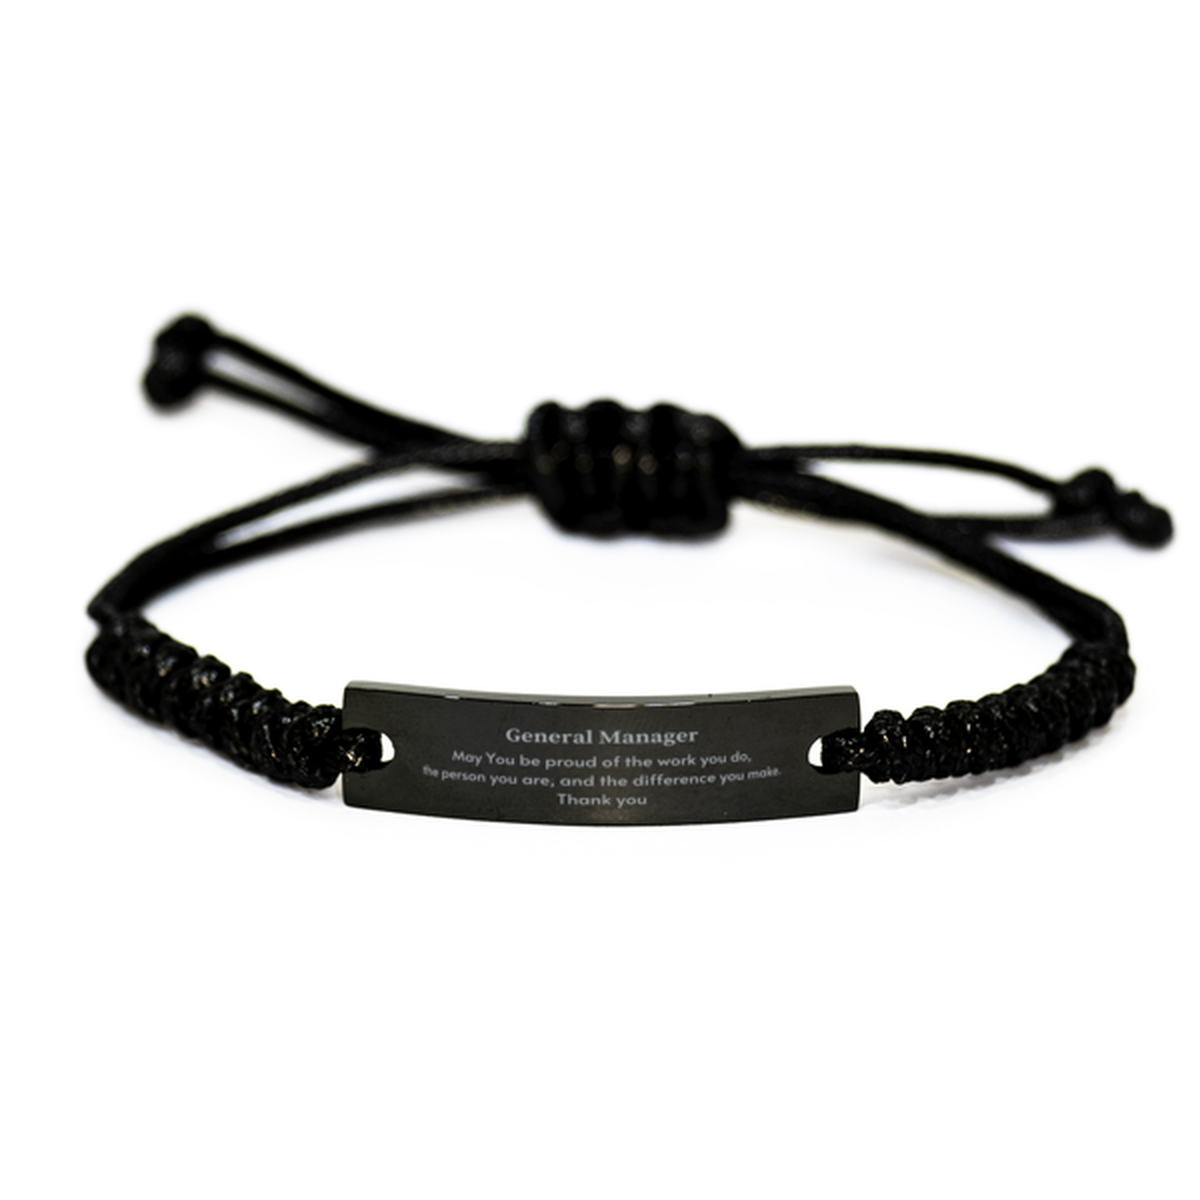 Heartwarming Black Rope Bracelet Retirement Coworkers Gifts for General Manager, General Manager May You be proud of the work you do, the person you are Gifts for Boss Men Women Friends